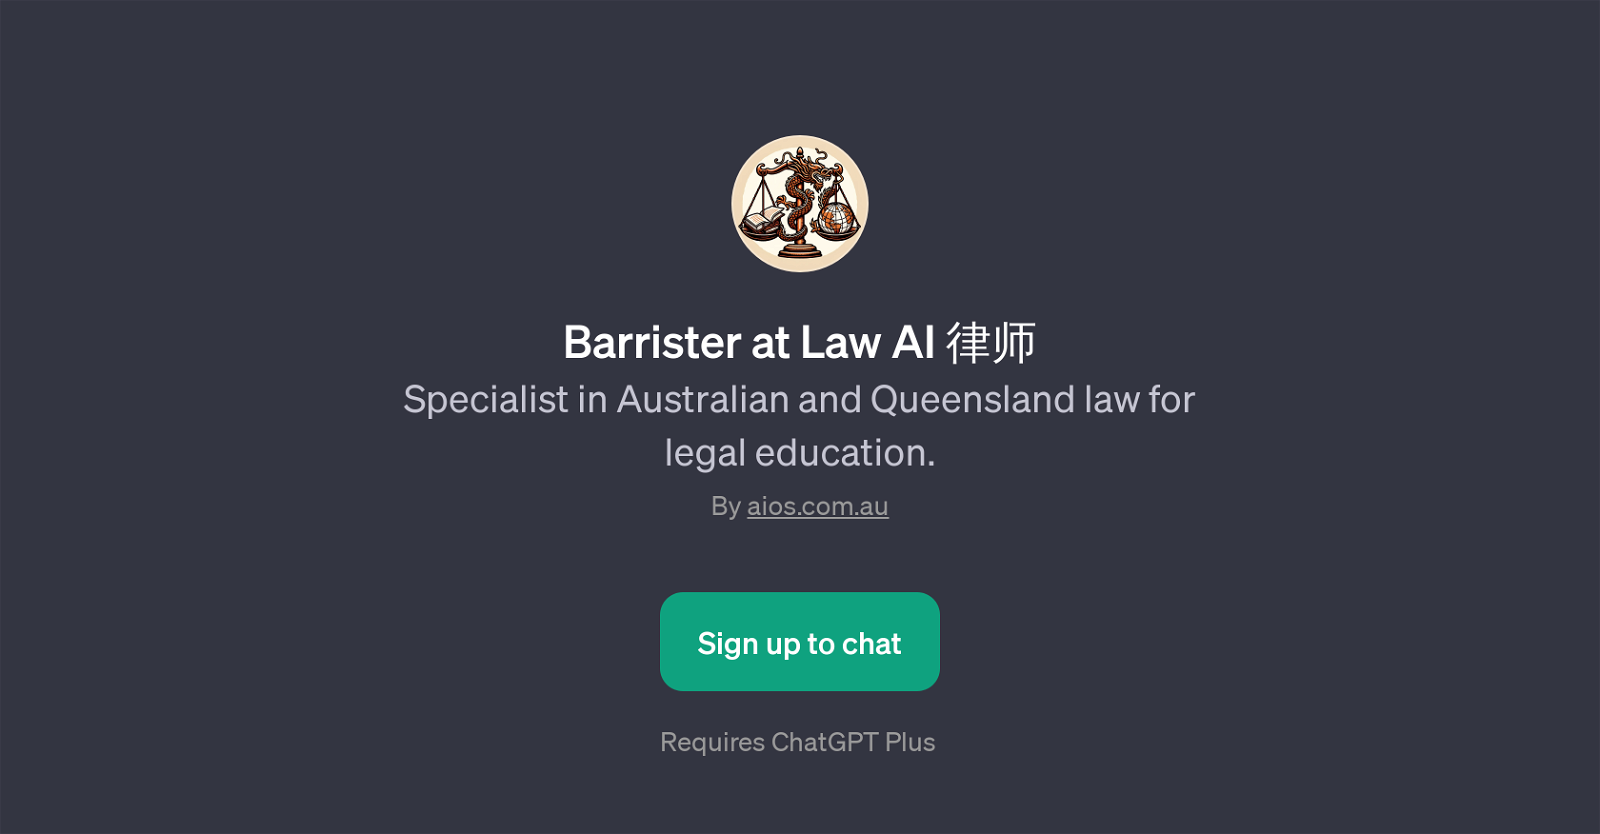 Barrister at Law AI website